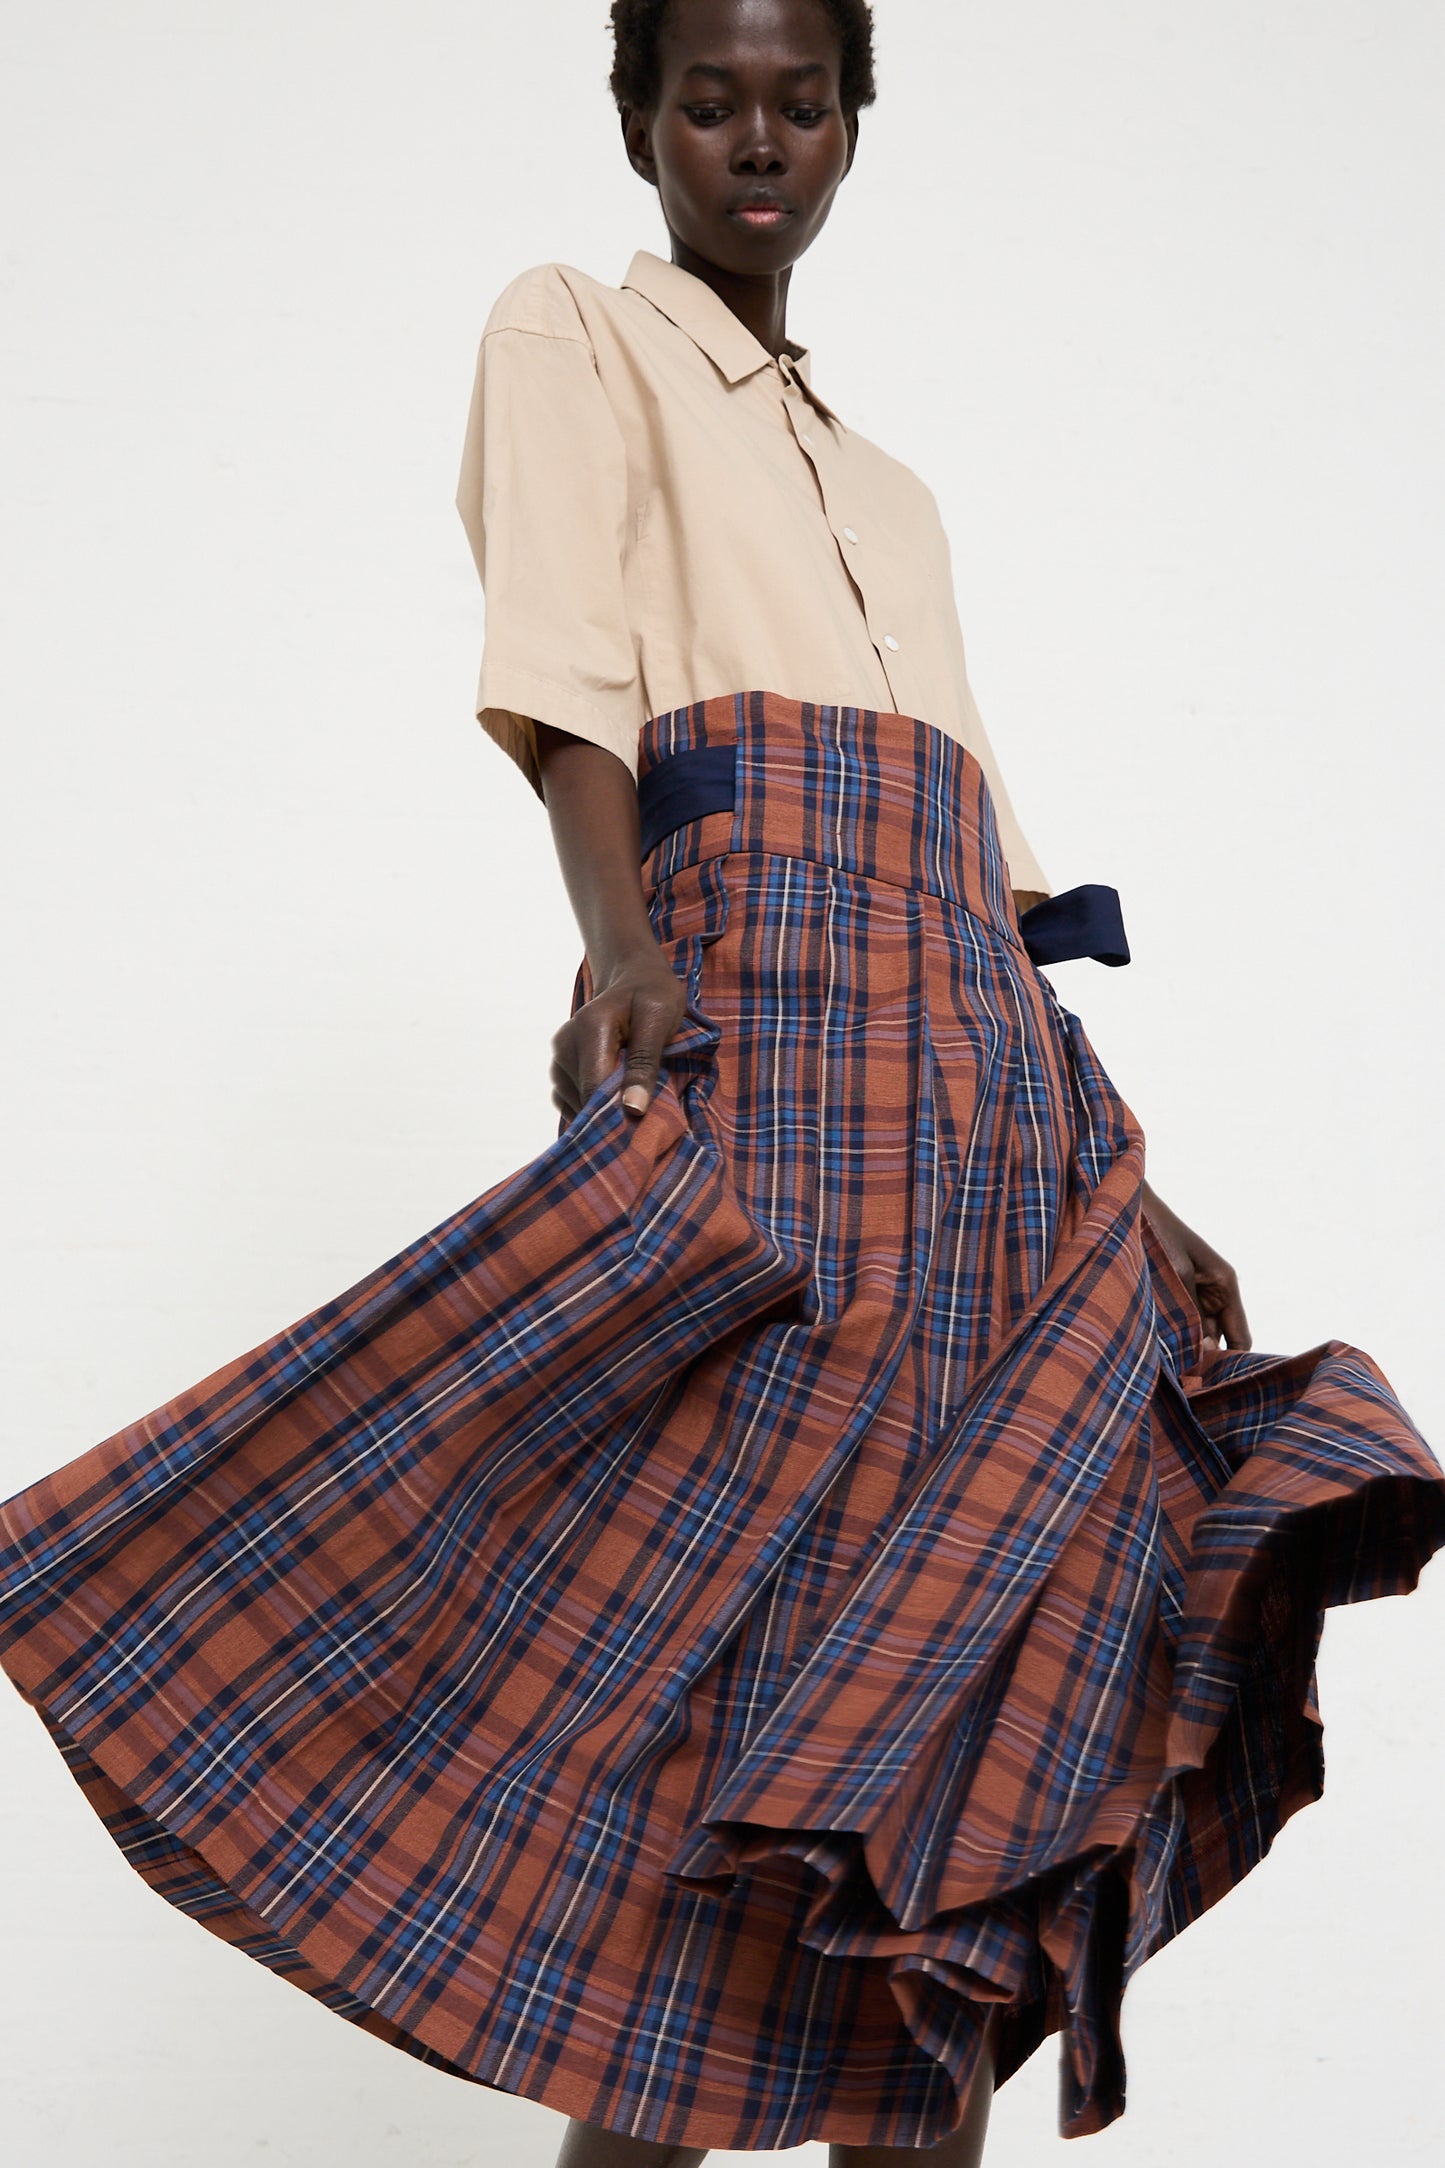 A person is wearing a beige short-sleeve shirt and a Cotton Linen Madras Plaid Cloth Pleated Wrap Maxi Skirt in Brick by Toujours, standing against a plain white background.